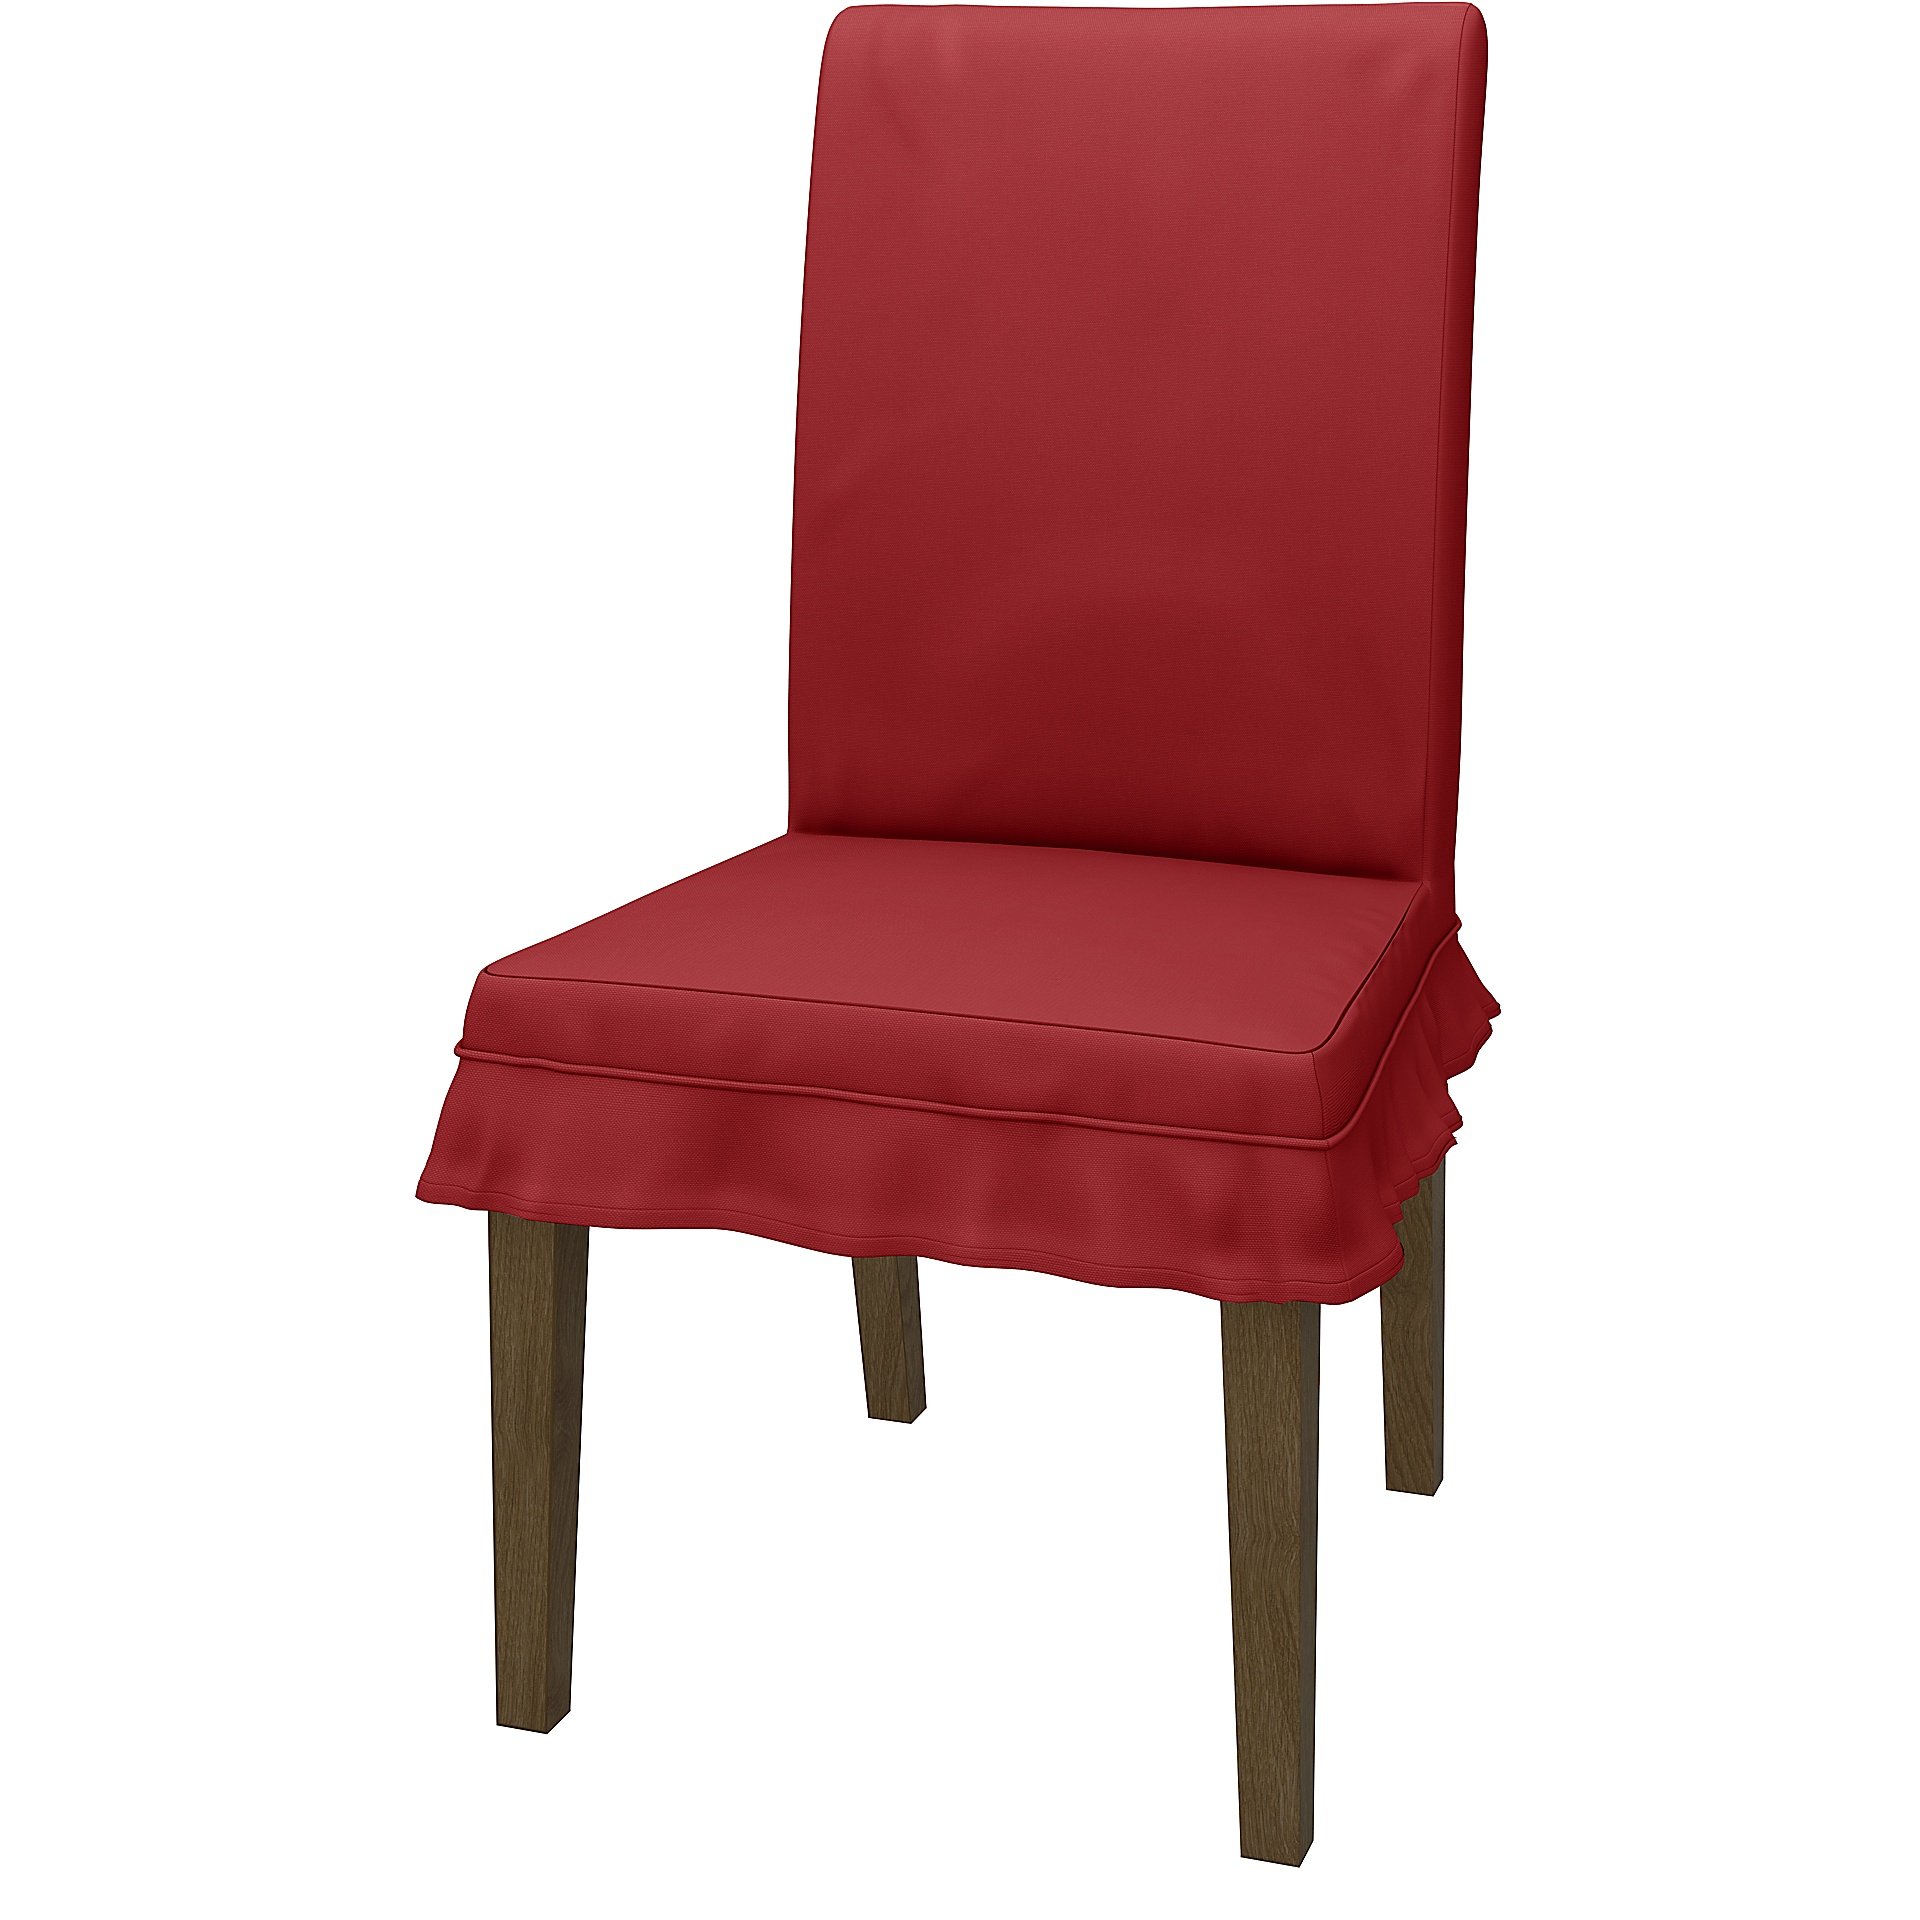 IKEA - HENRIKSDAL DINING CHAIR COVER SHORT SKIRT WITH RUFFLES (STANDARD MODEL), Scarlet Red, Cotton 